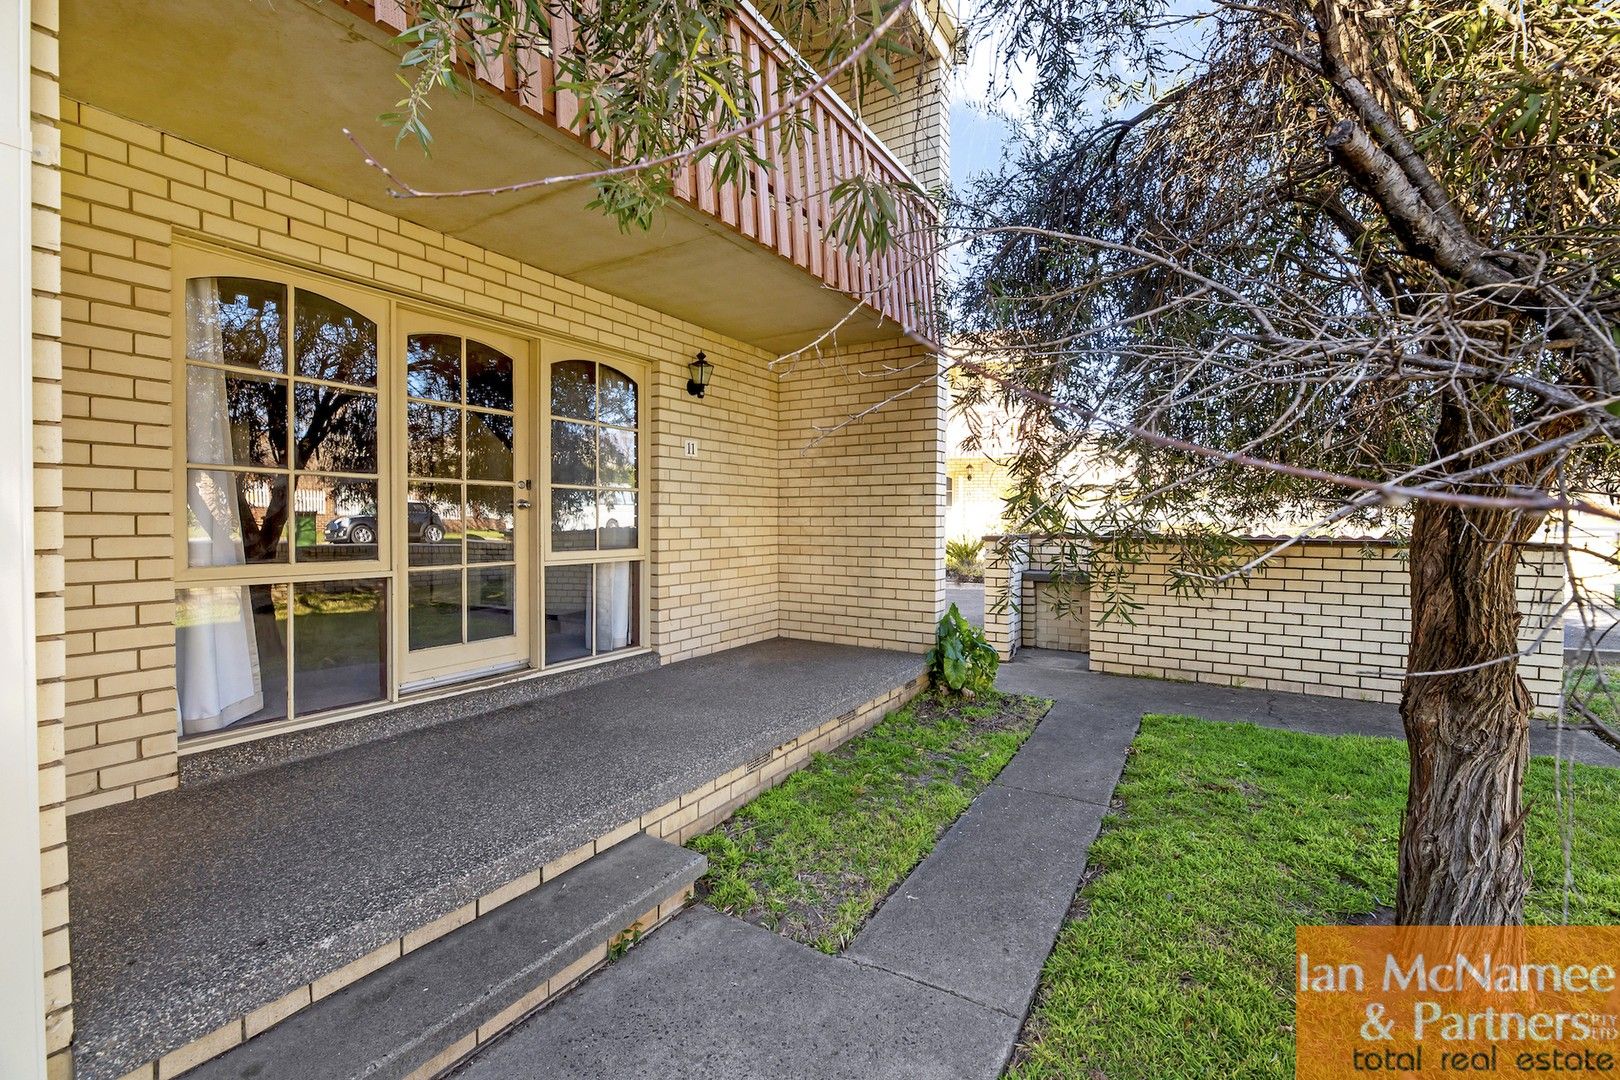 2 bedrooms Townhouse in 11/16 Broughton Place QUEANBEYAN NSW, 2620